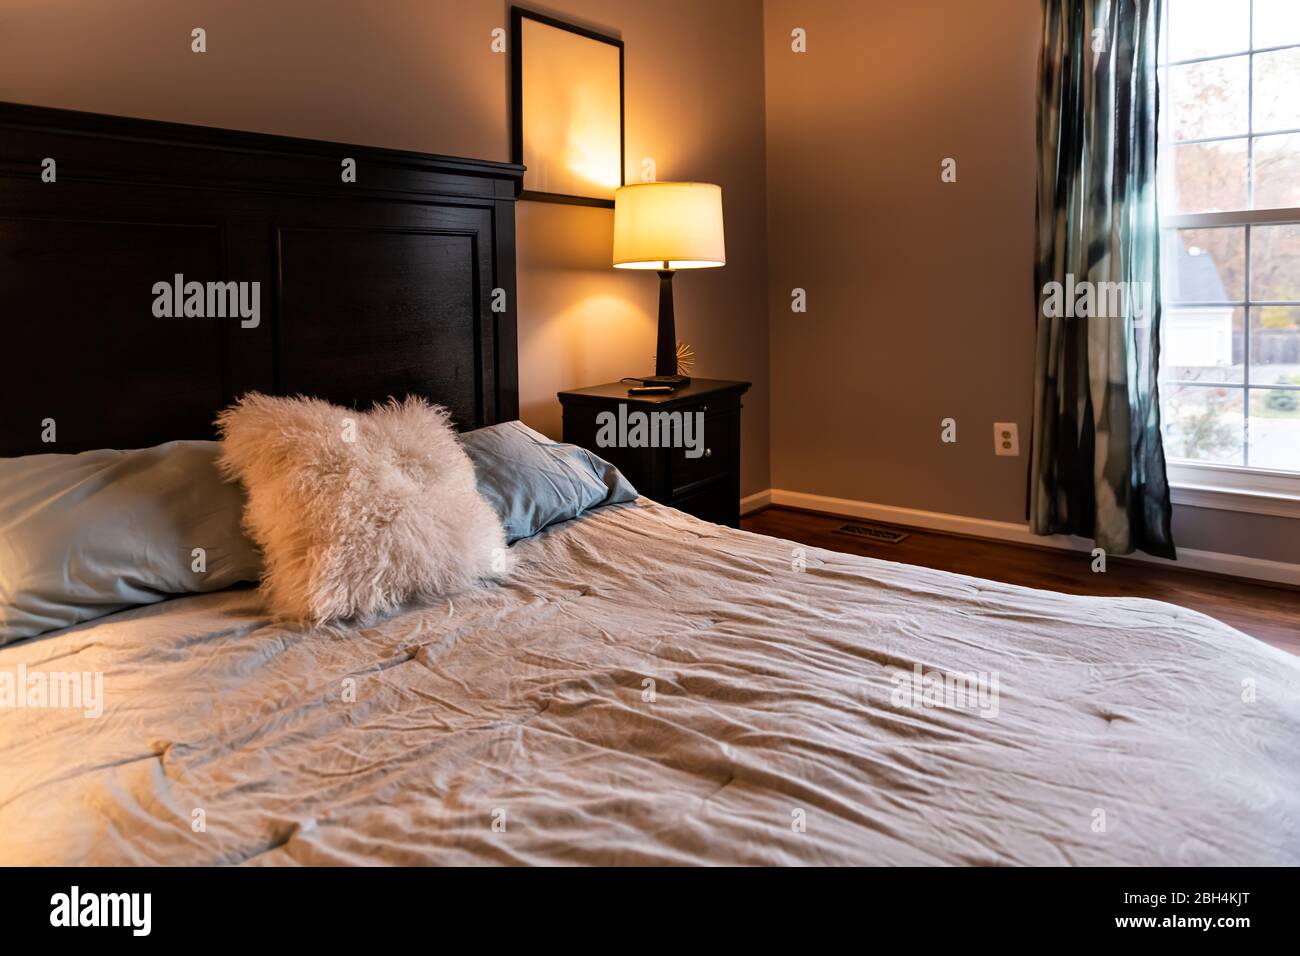 https://c8.alamy.com/comp/2BH4KJT/closeup-of-bed-with-decorative-fluffy-pillow-and-wooden-headboard-in-bedroom-in-staging-home-house-country-style-2BH4KJT.jpg